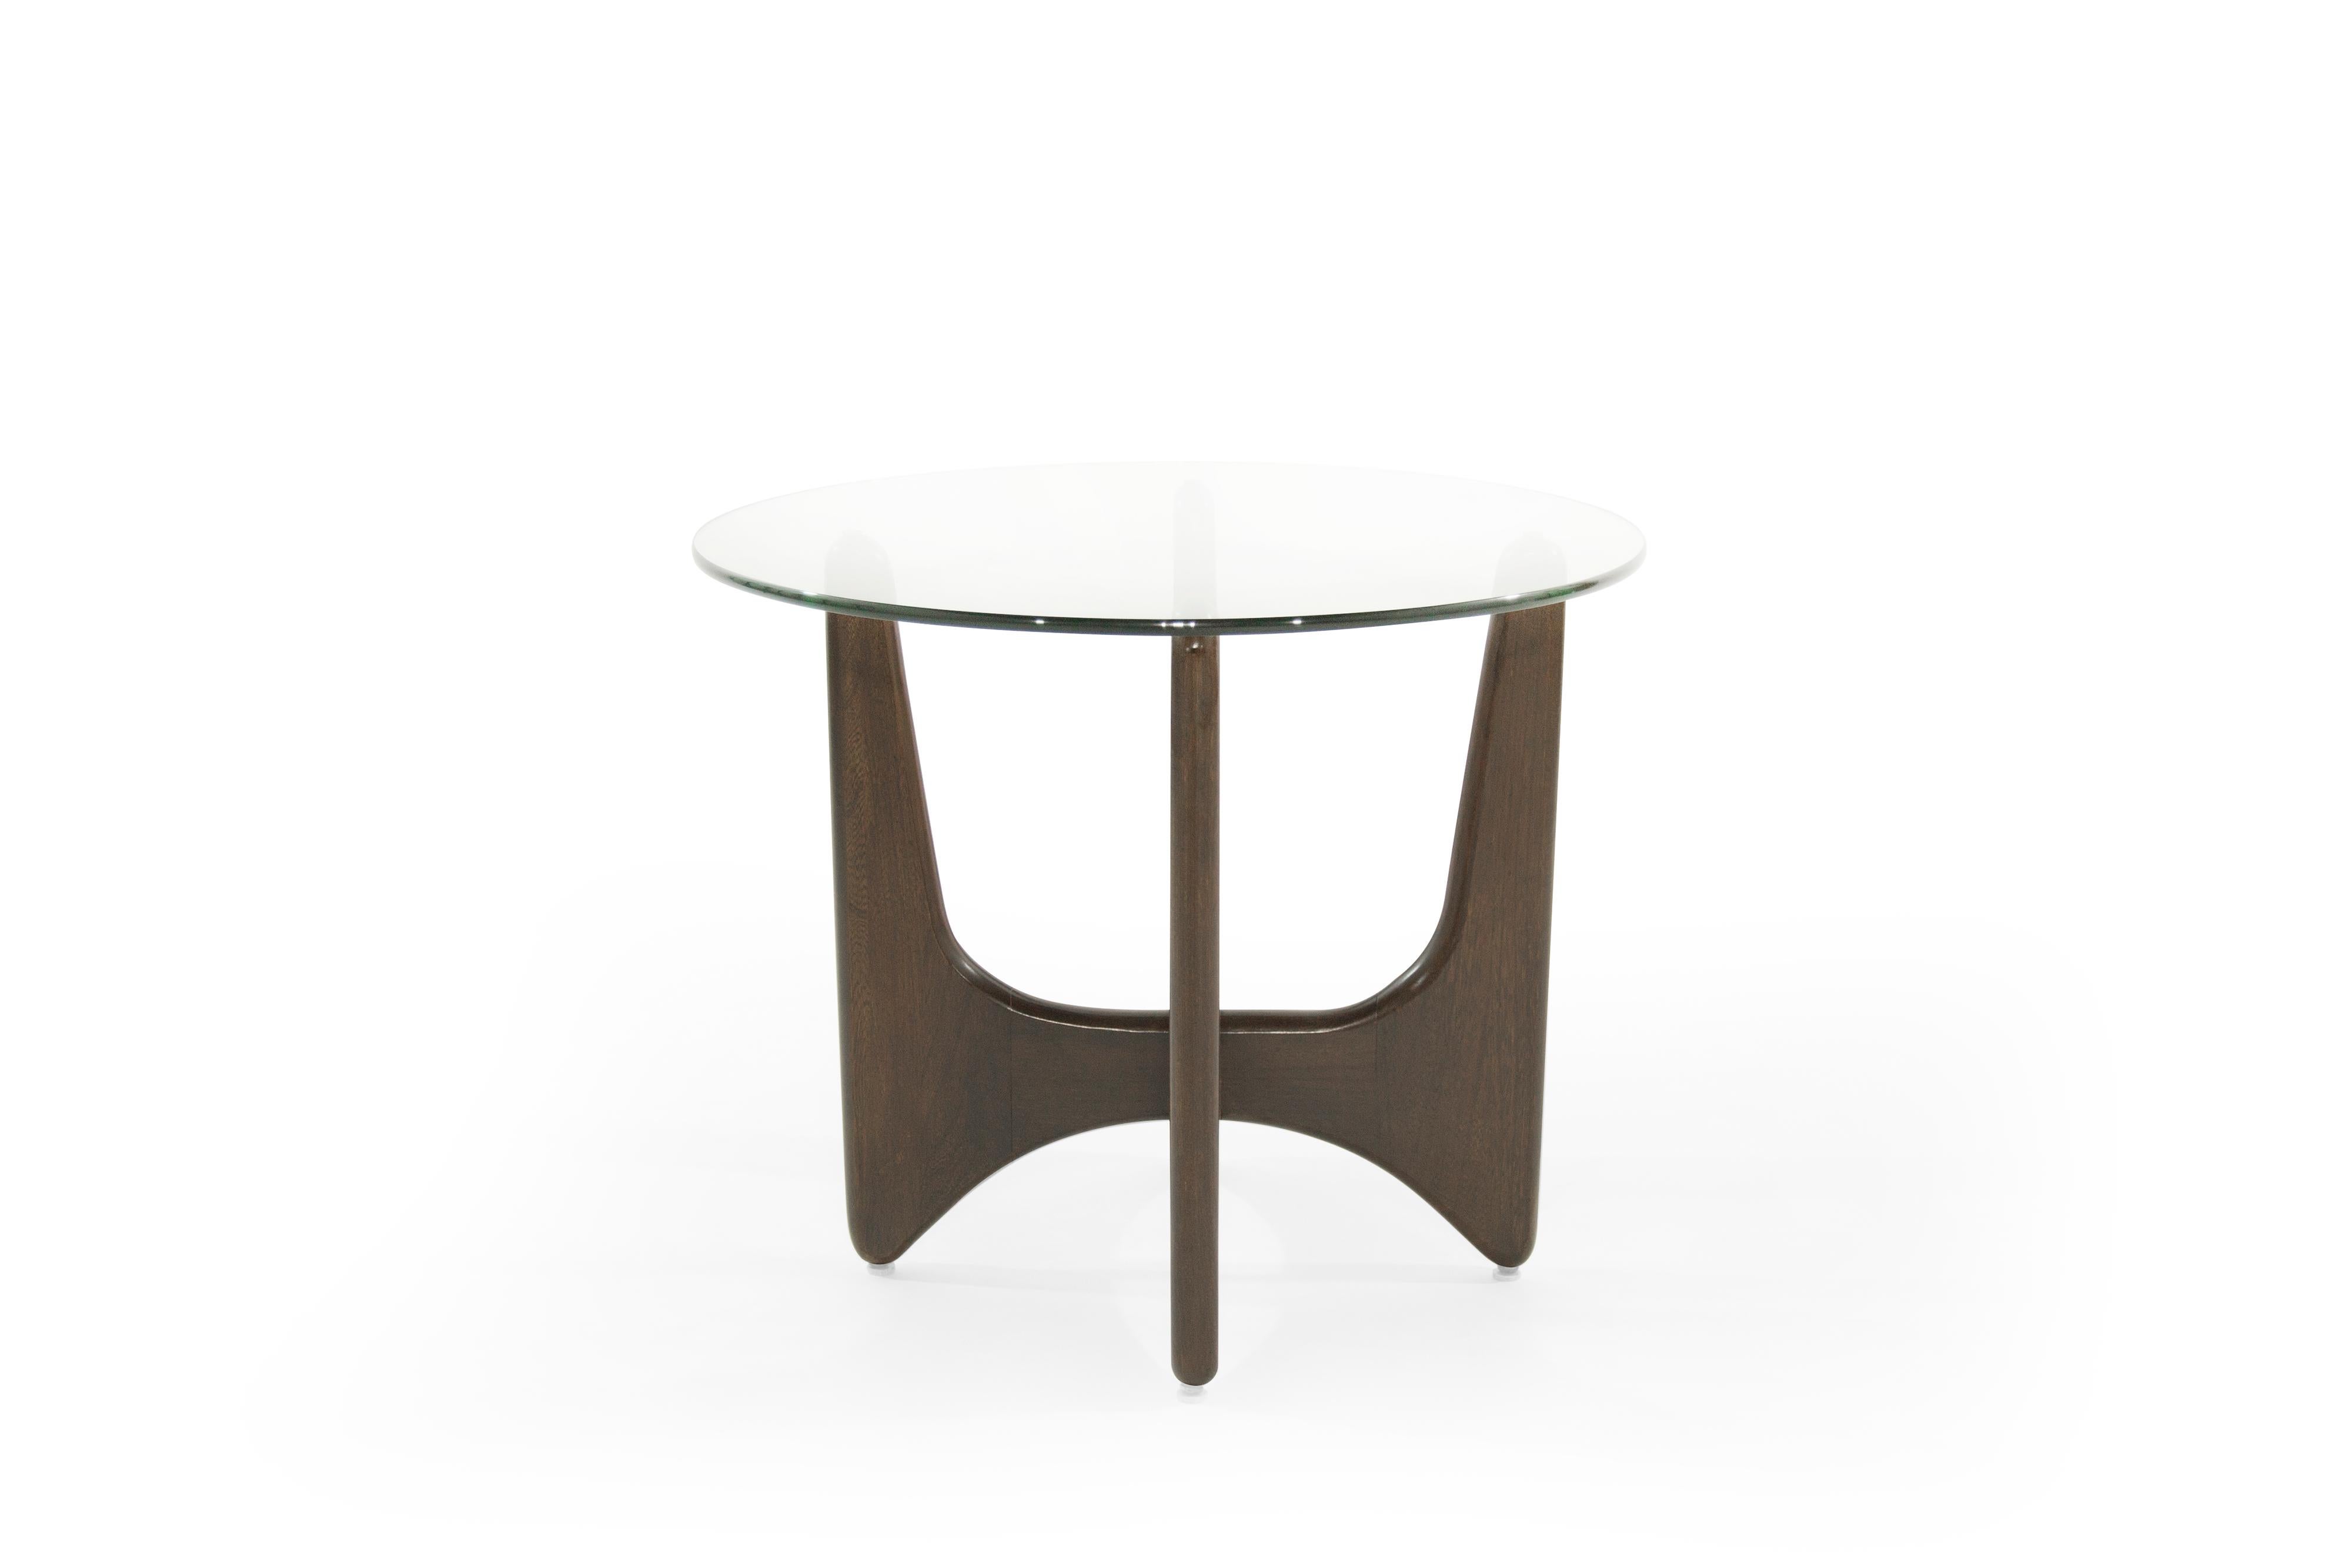 20th Century Adrian Pearsall for Craft Associates Walnut End Tables